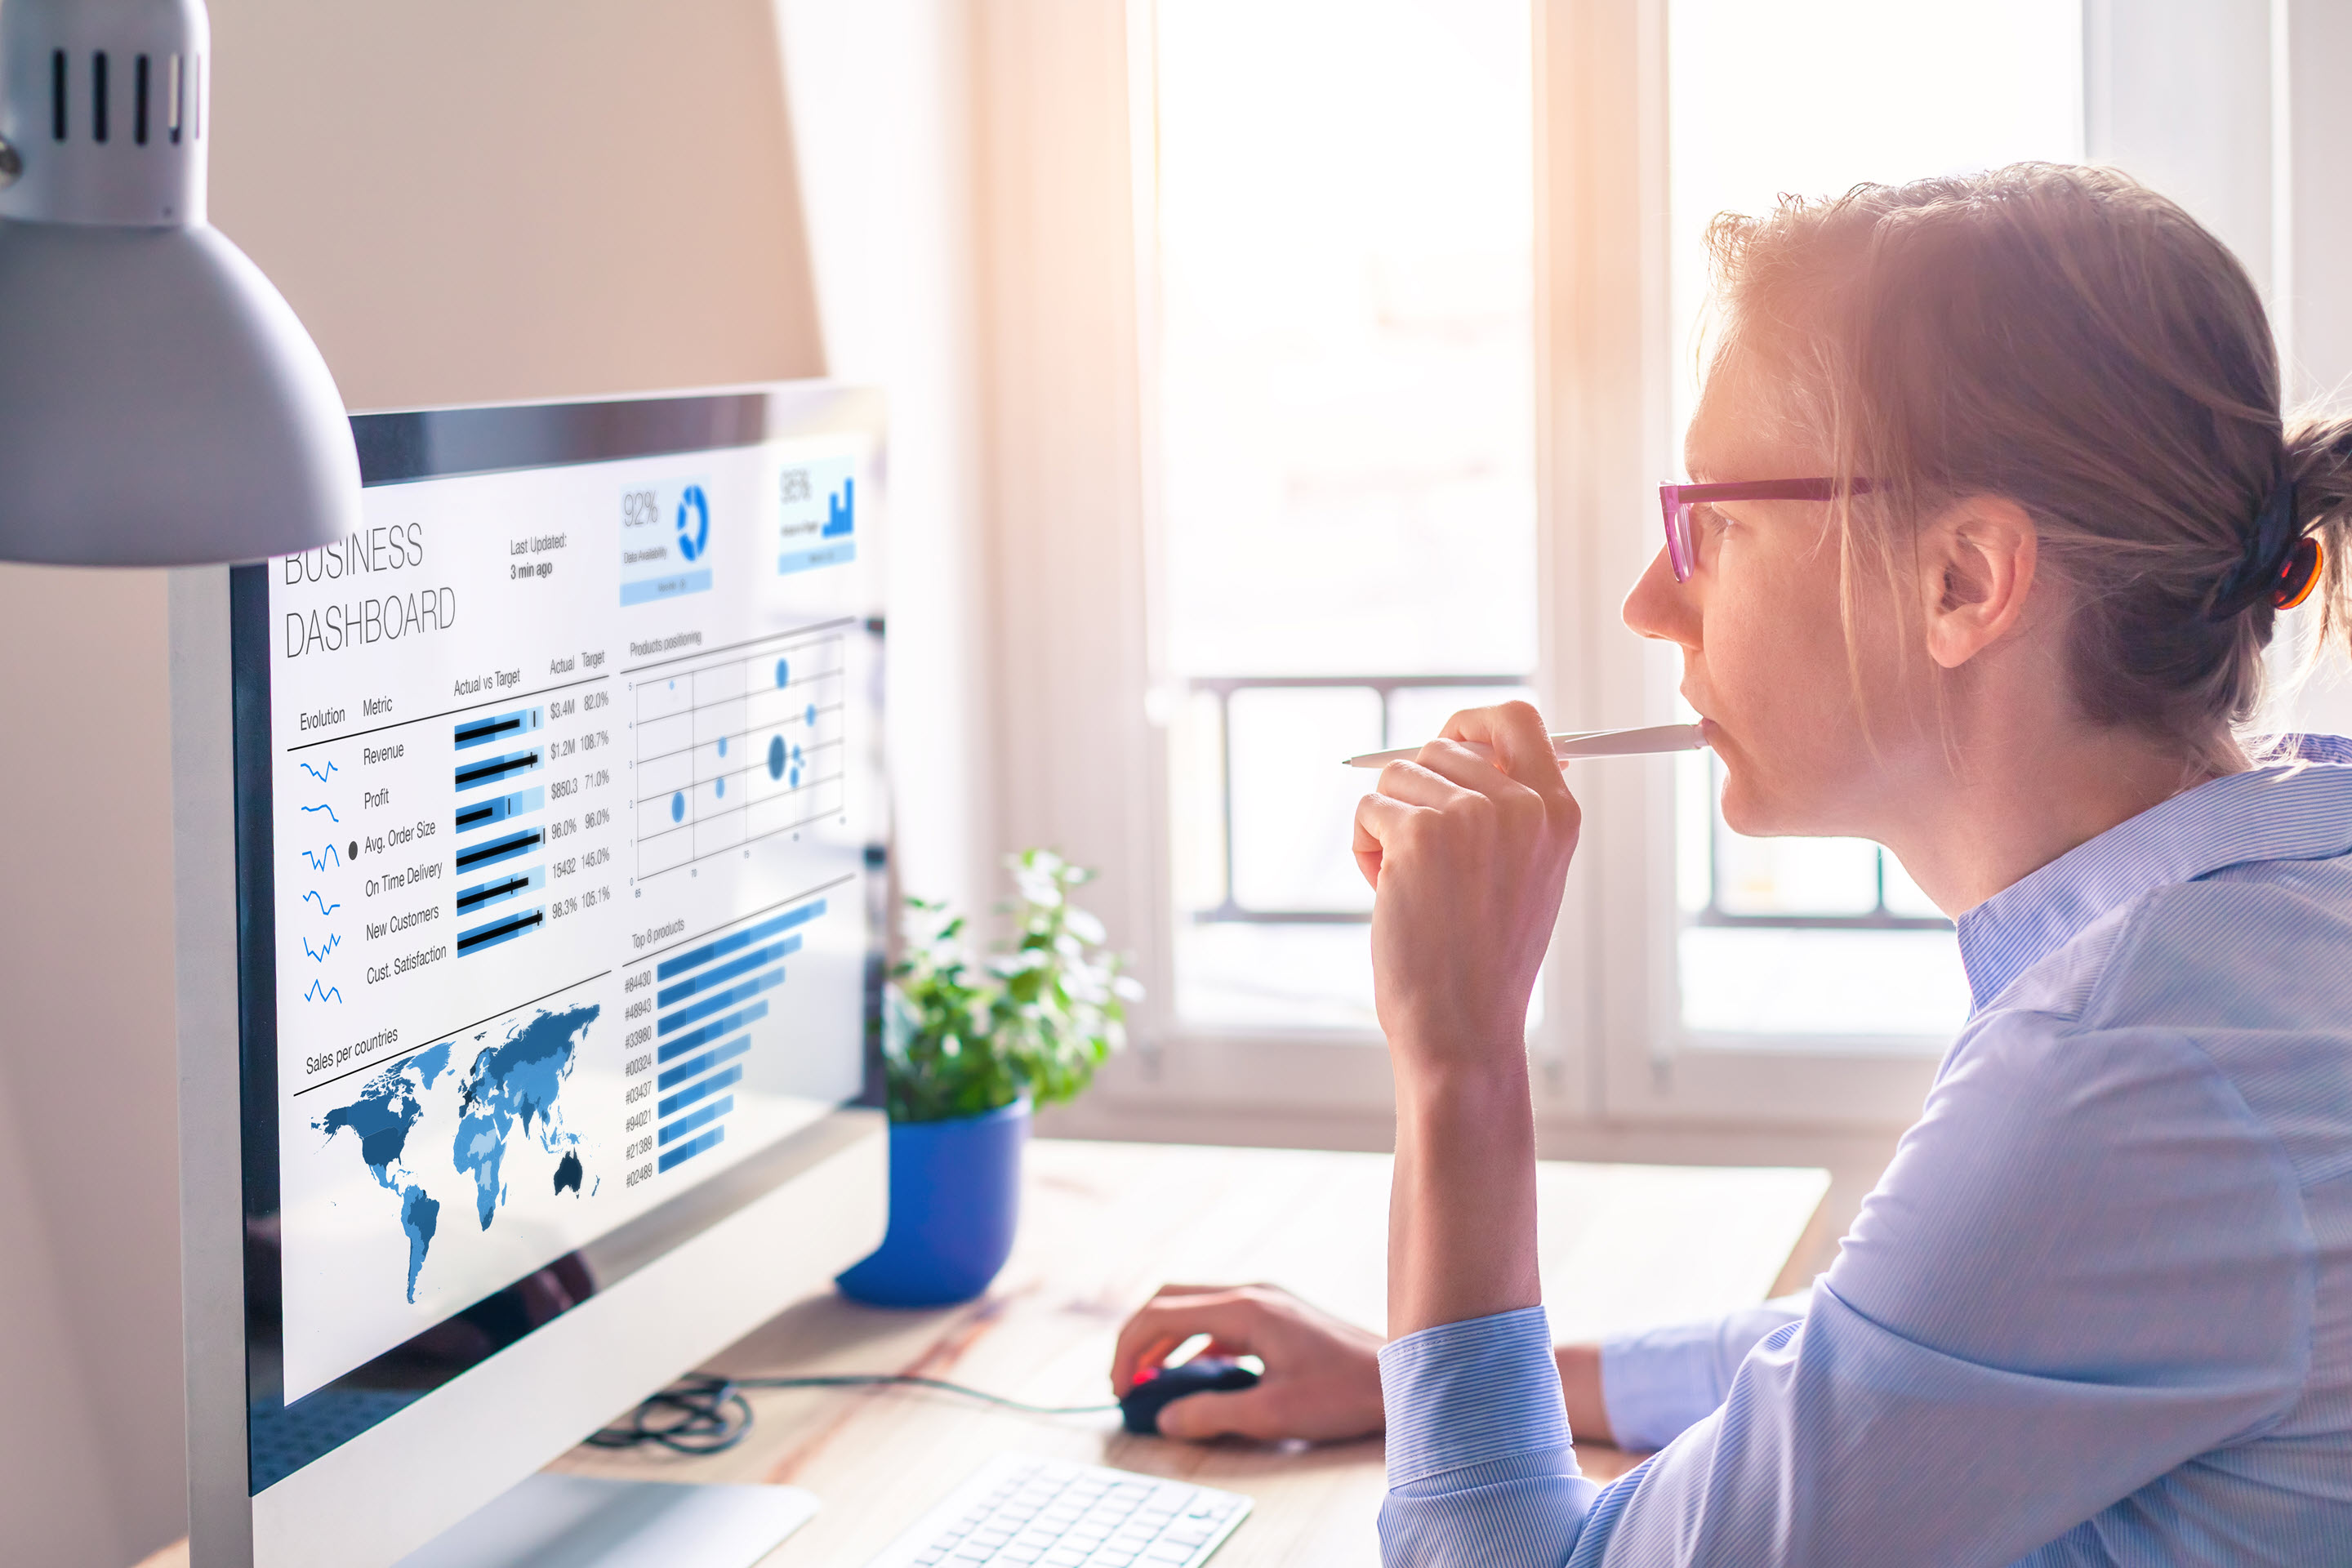 A woman in thought at her computer. She is reviewing a global business dashboard on her computer in front of her with various data metrics and blue graphs related to her organization. She is chewing on a pen, has her glasses on, and has her hair in a bun to illustrate her attentiveness.